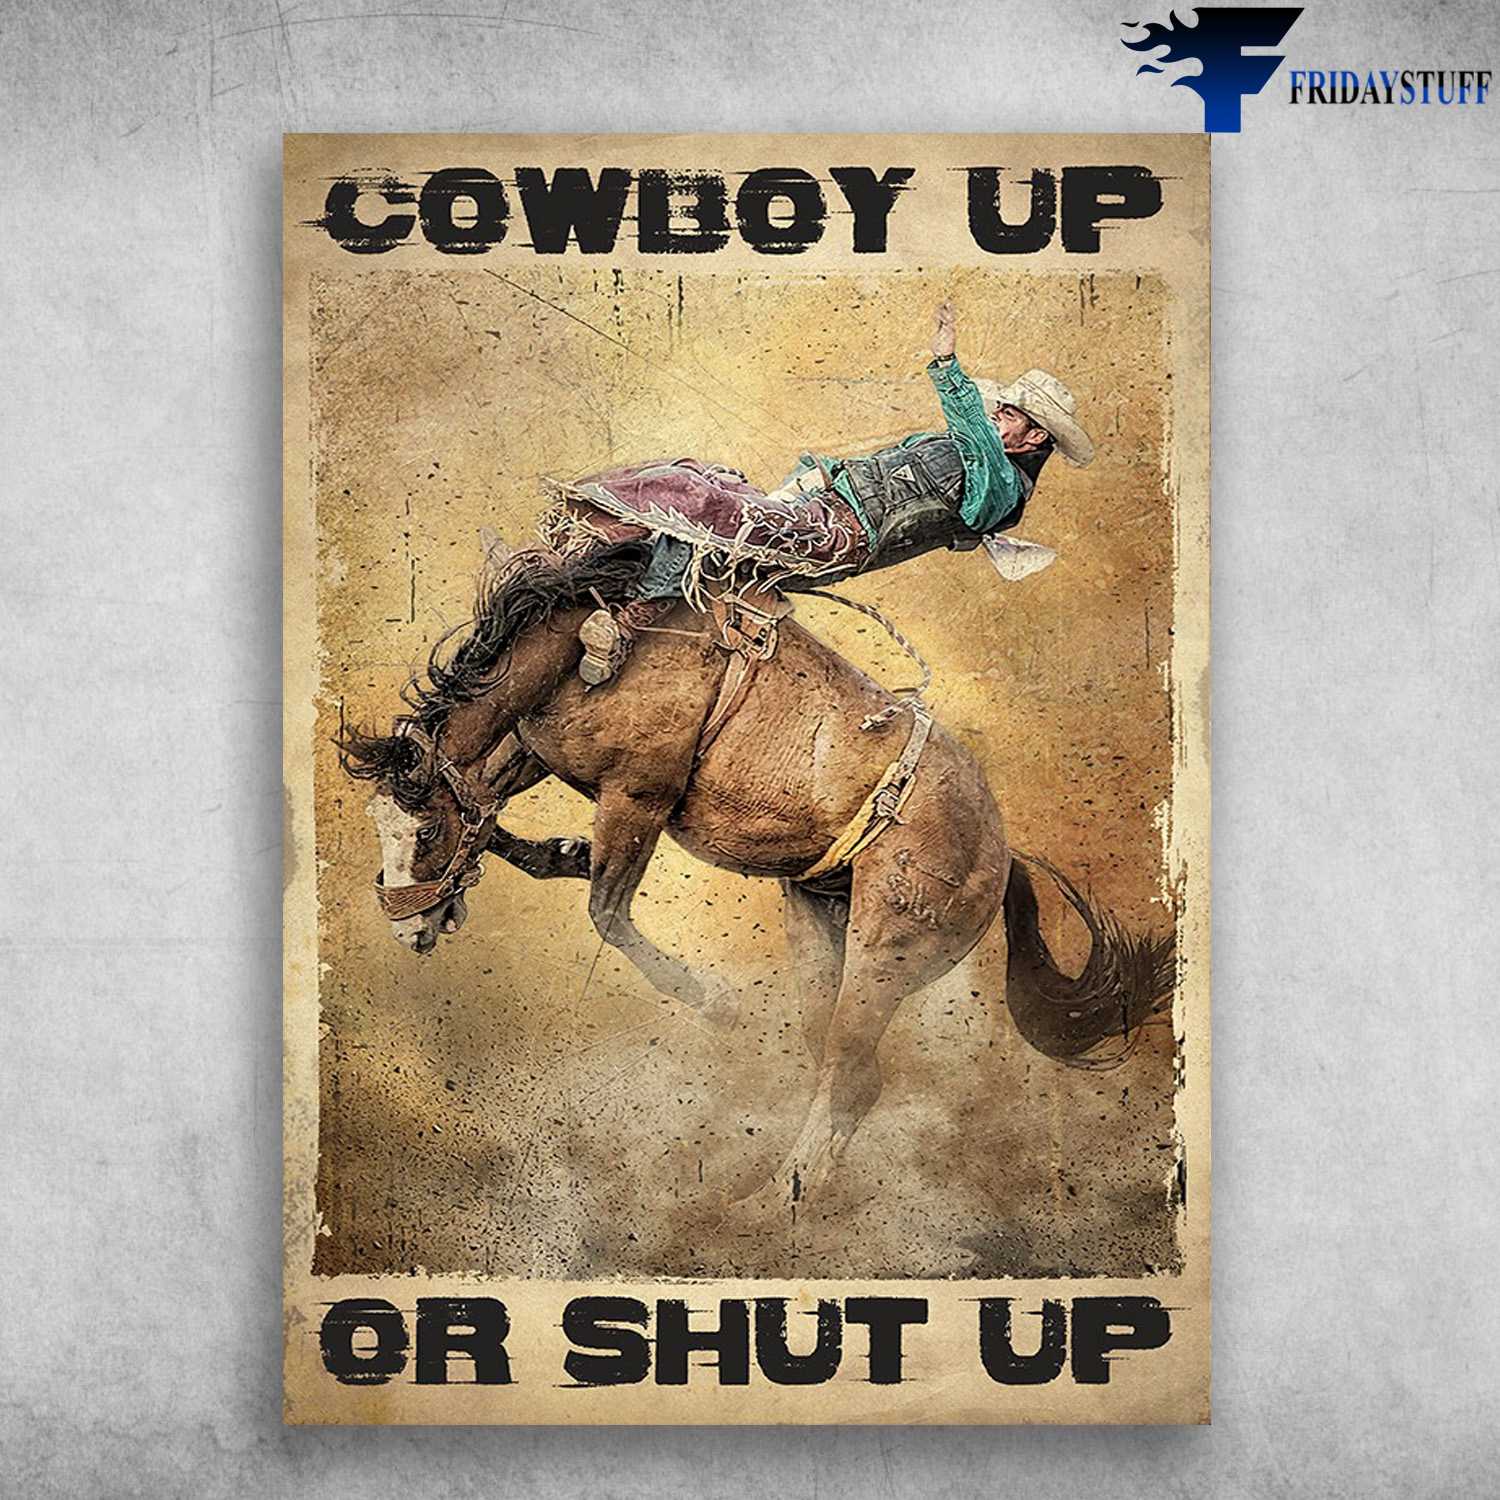 Horse Riding, Cow Boy - Cowboy Up, Or Shut Up